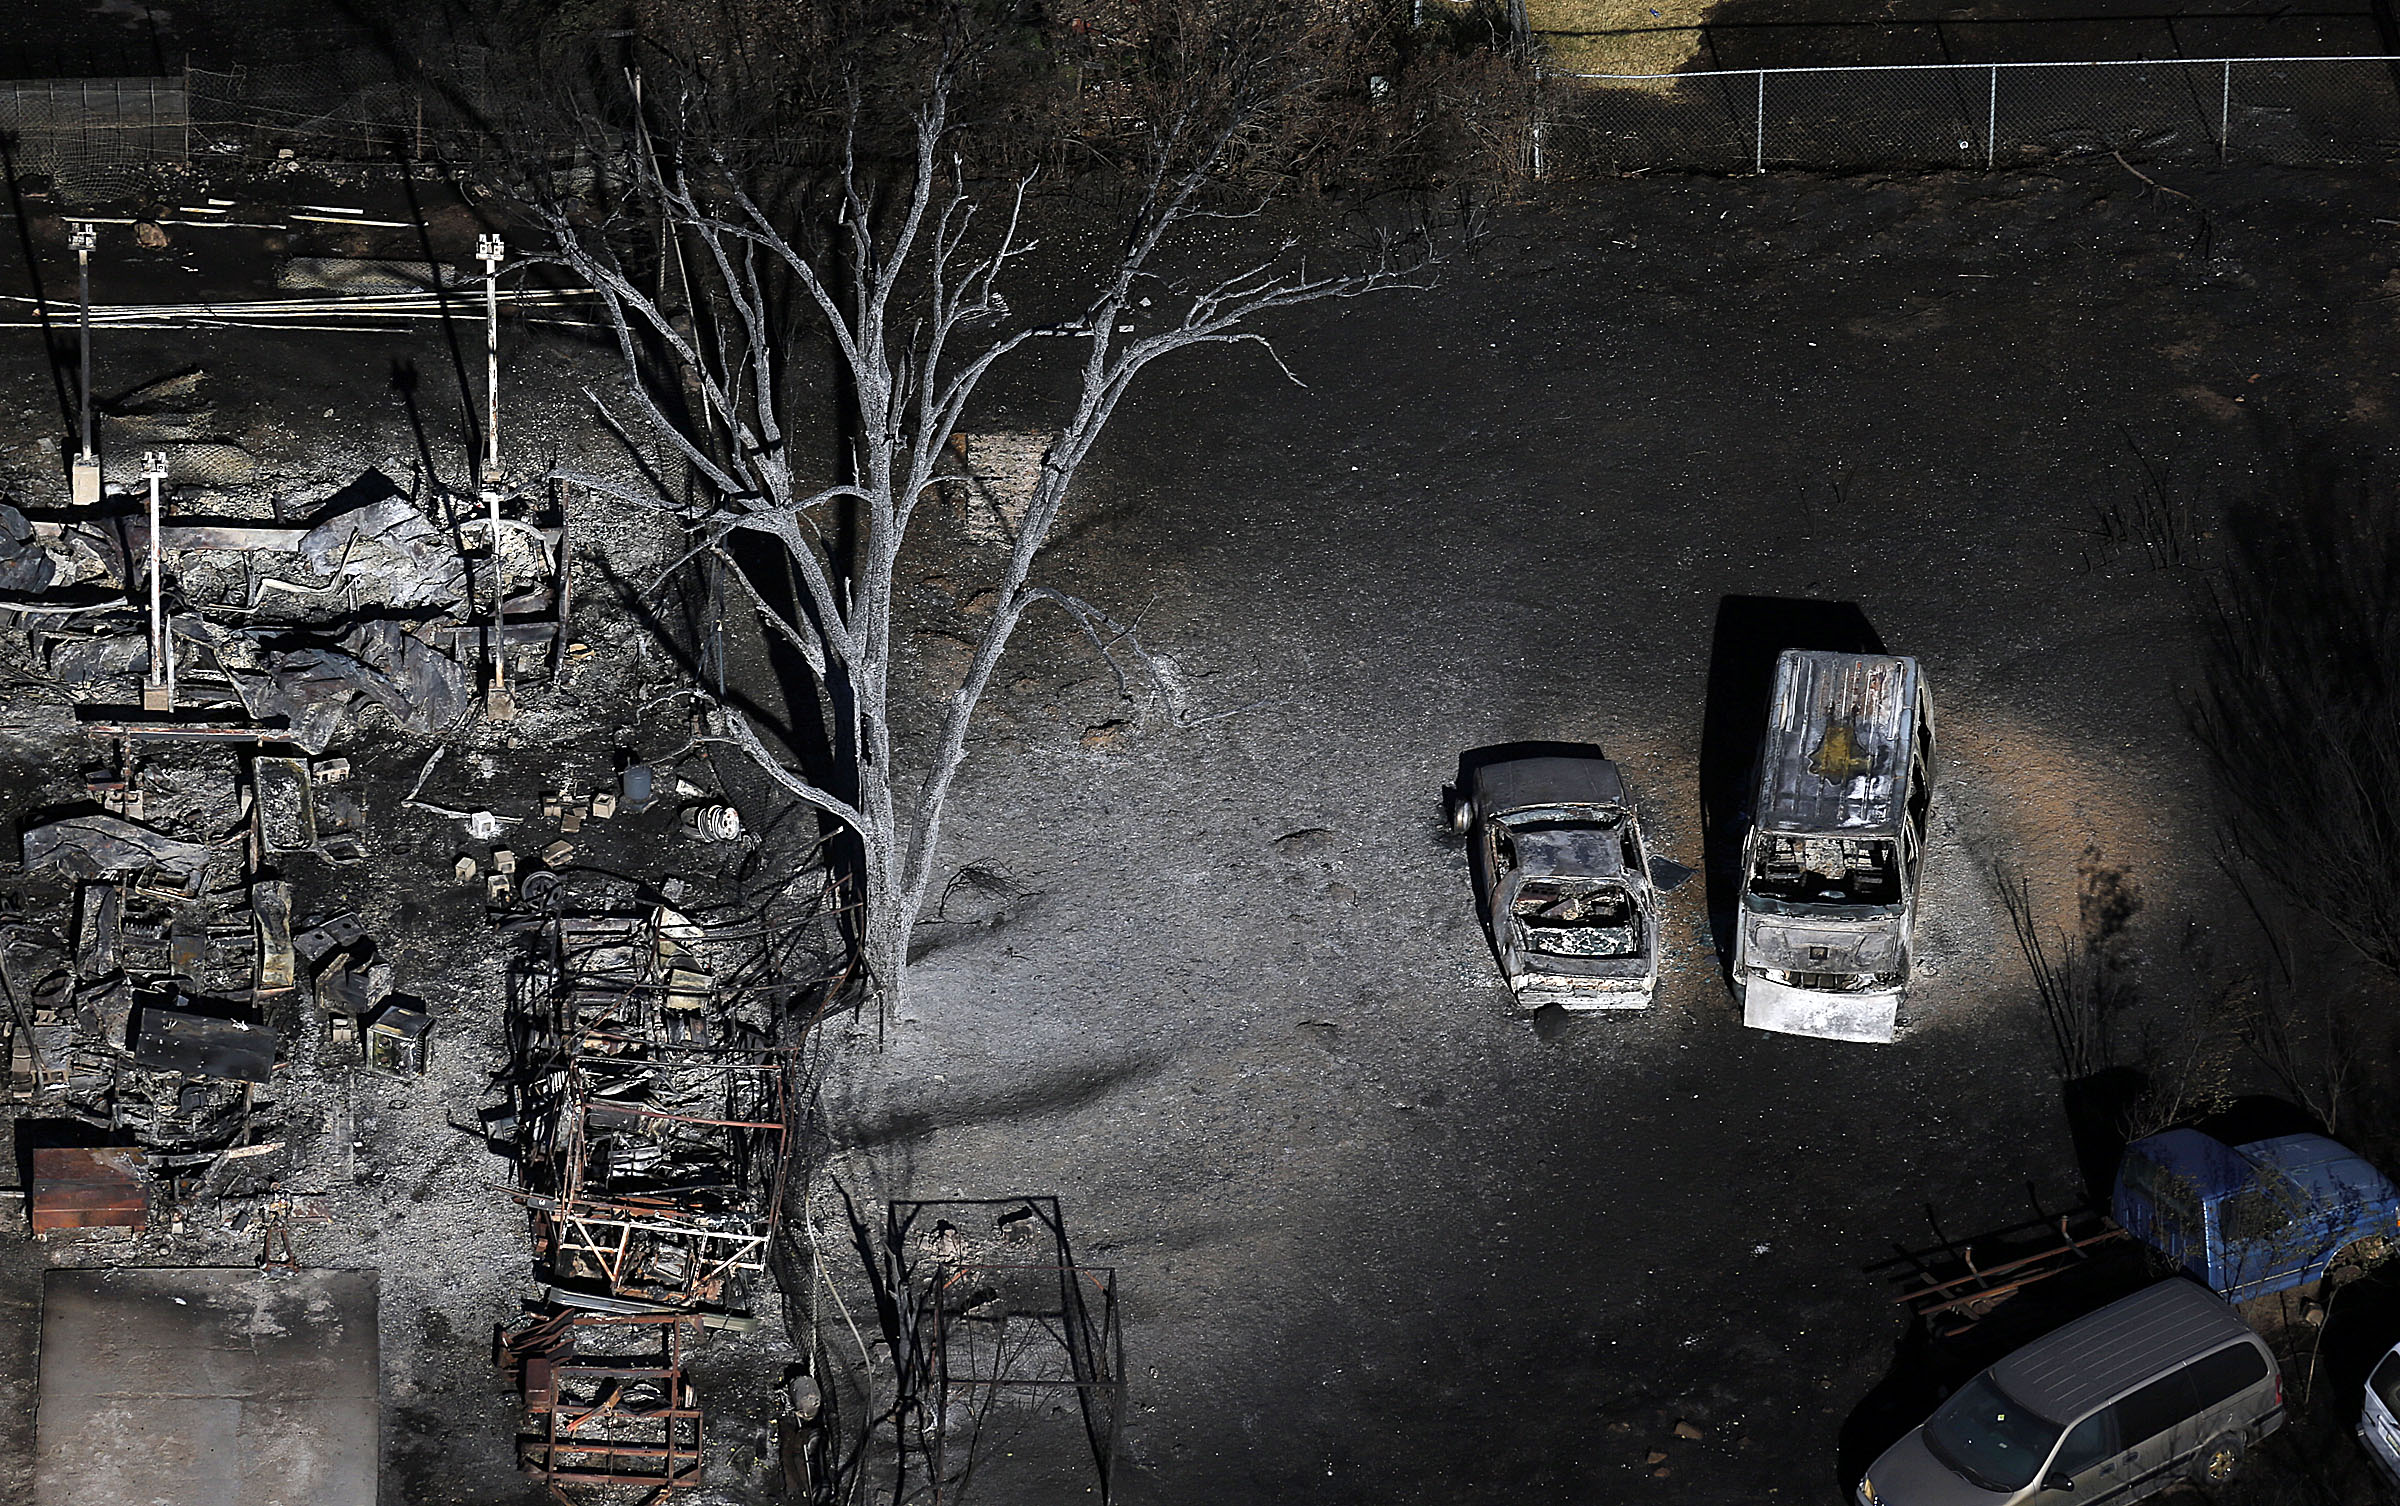 Burnt vehicles and charred debris remain following a fire in Tooele, Utah on Wednesday, July 20, 2016. Firefighters contained a blaze fueled by wind that ripped through a Utah trailer park, displacing dozens of people and destroying multiple homes. (Ravell Call/The Deseret News via AP)